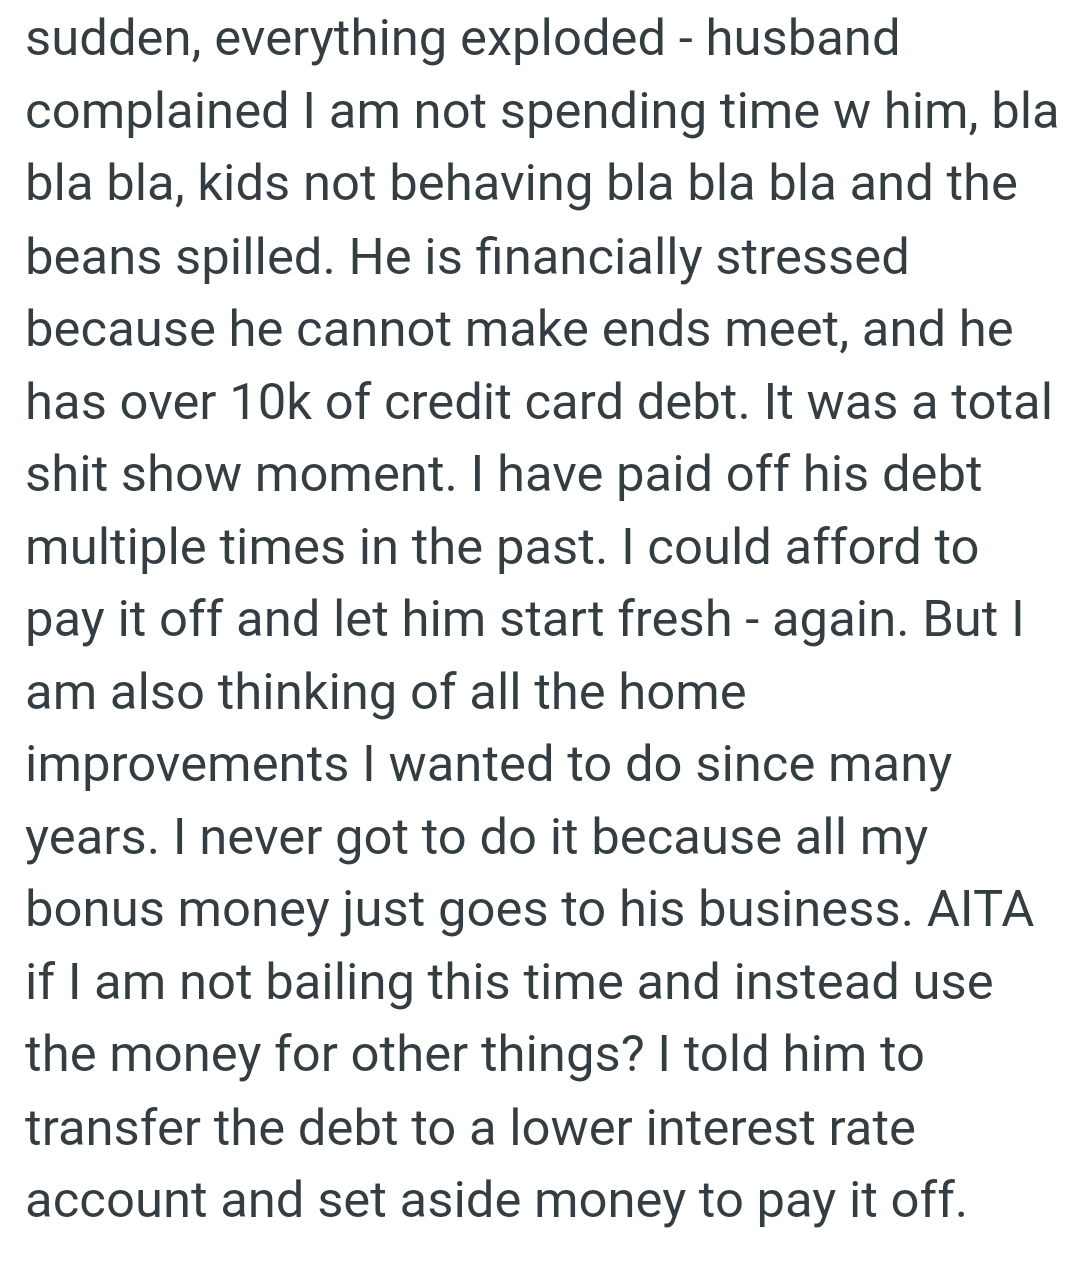 OP never got to do home renovations because all her bonus money just goes to his business